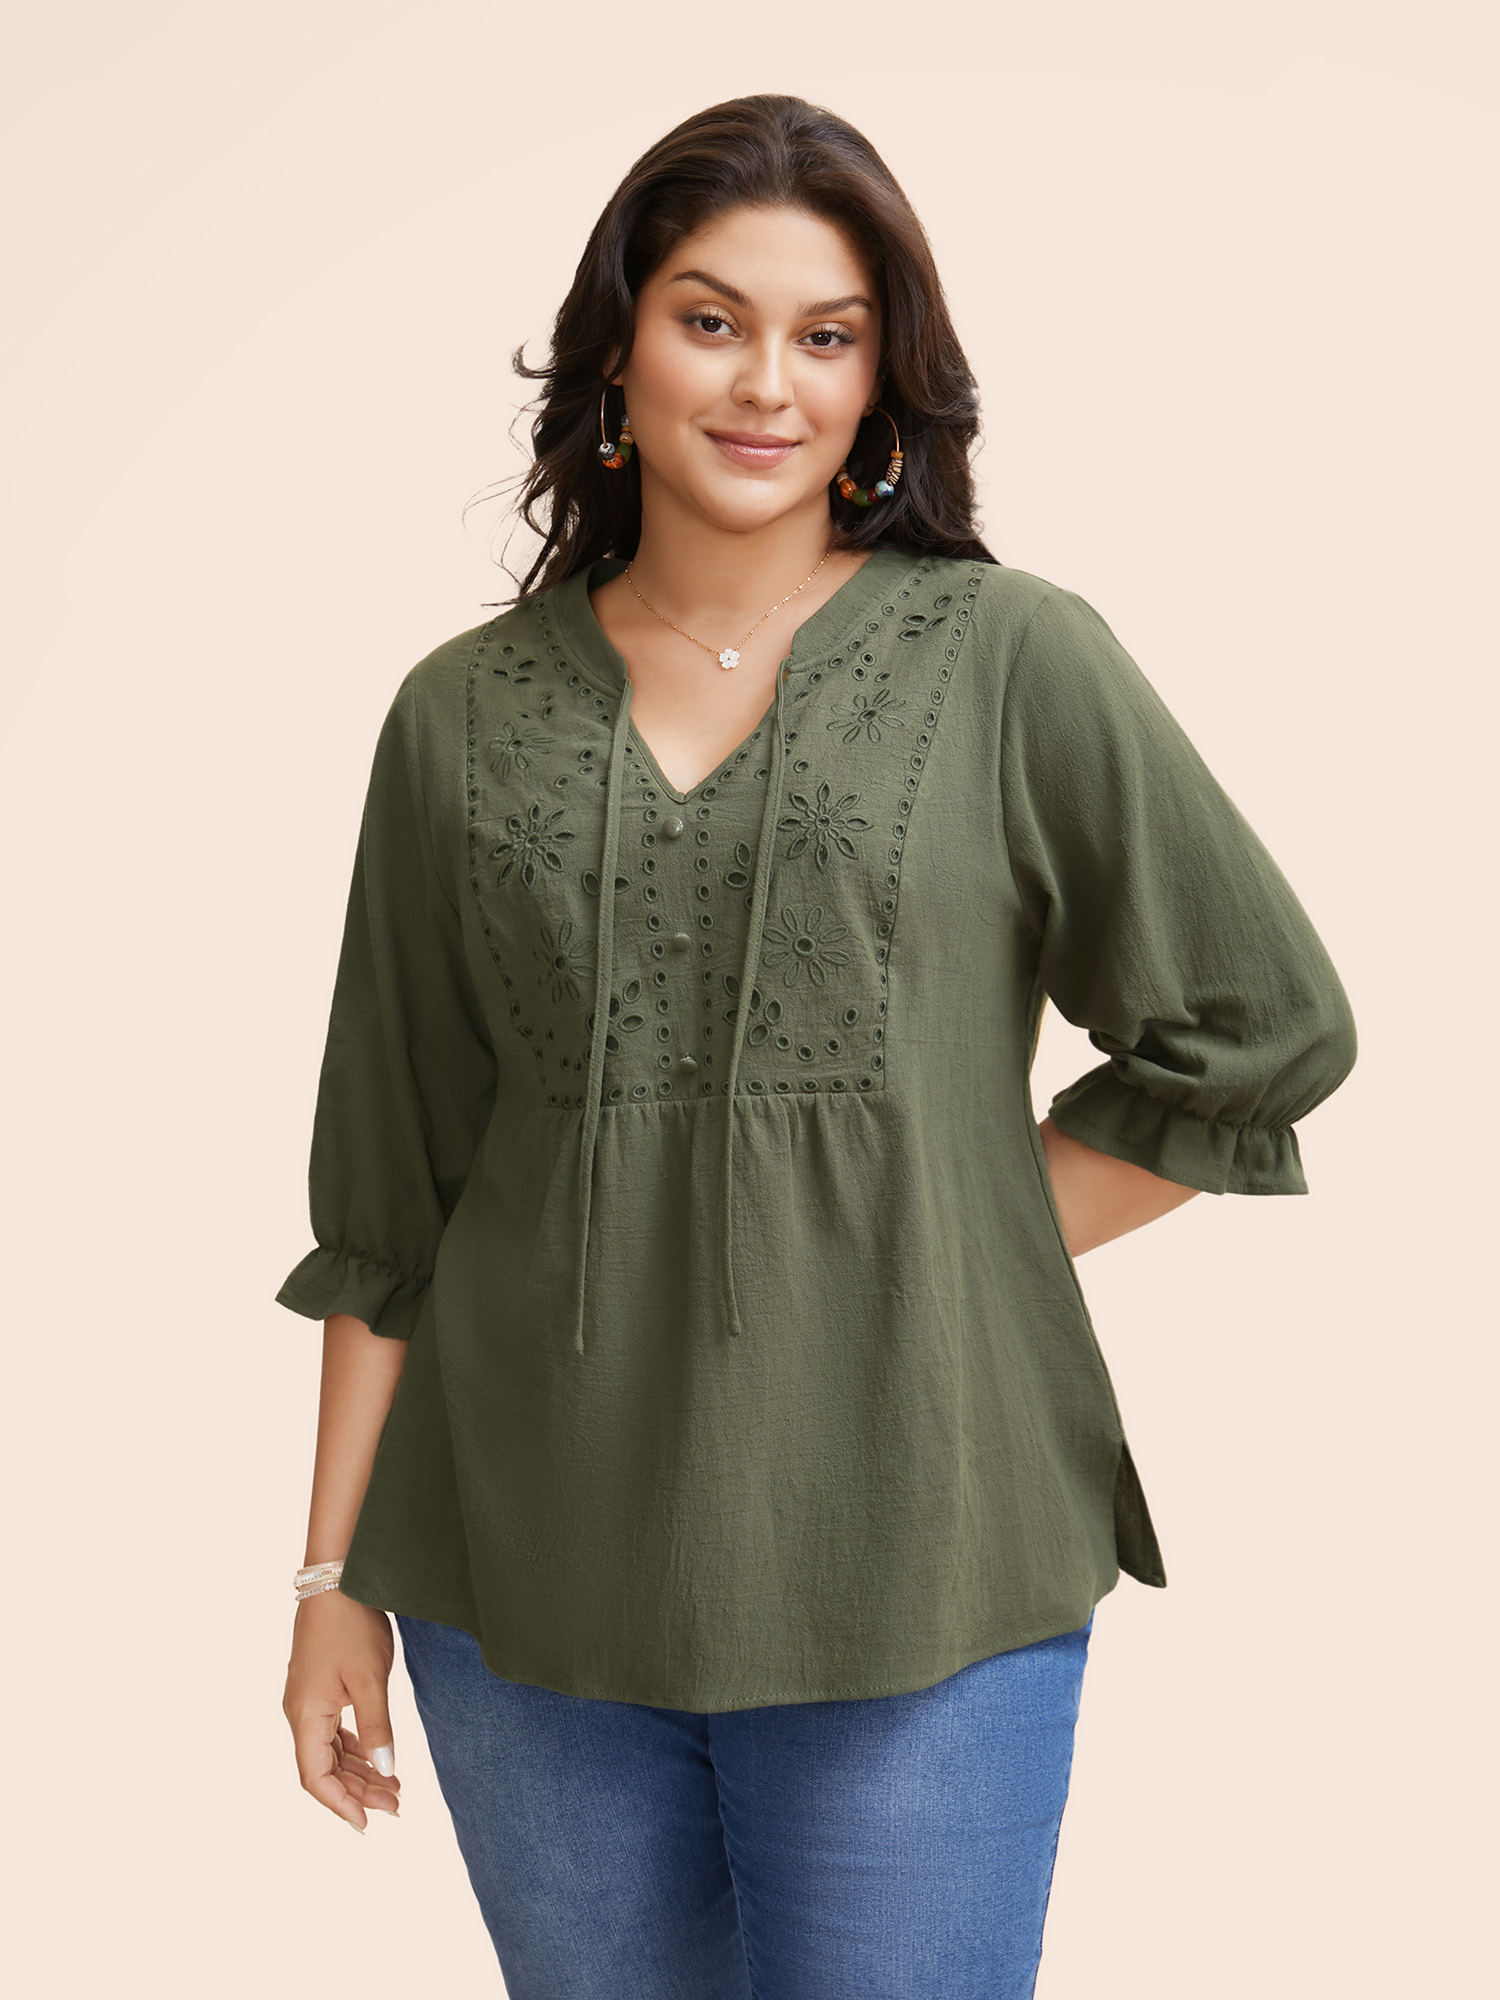 

Plus Size ArmyGreen Broderie Anglaise Tie Knot Lantern Sleeve Blouse Women Resort Elbow-length sleeve Notched collar Vacation Blouses BloomChic